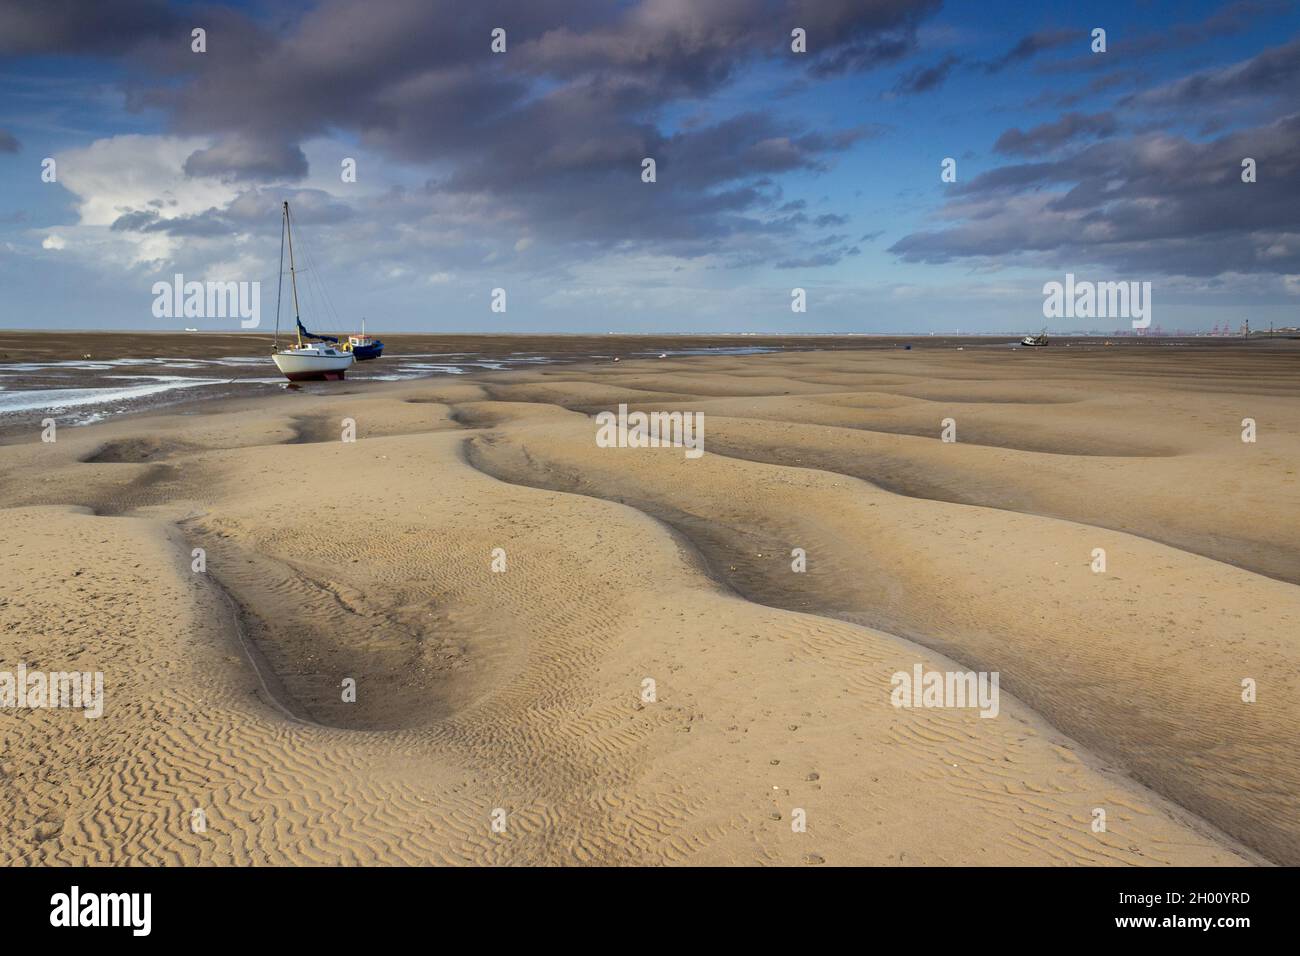 Meols, UK: Fishing boat moored on the beach at low tide on the North Wirral coastline. Stock Photo